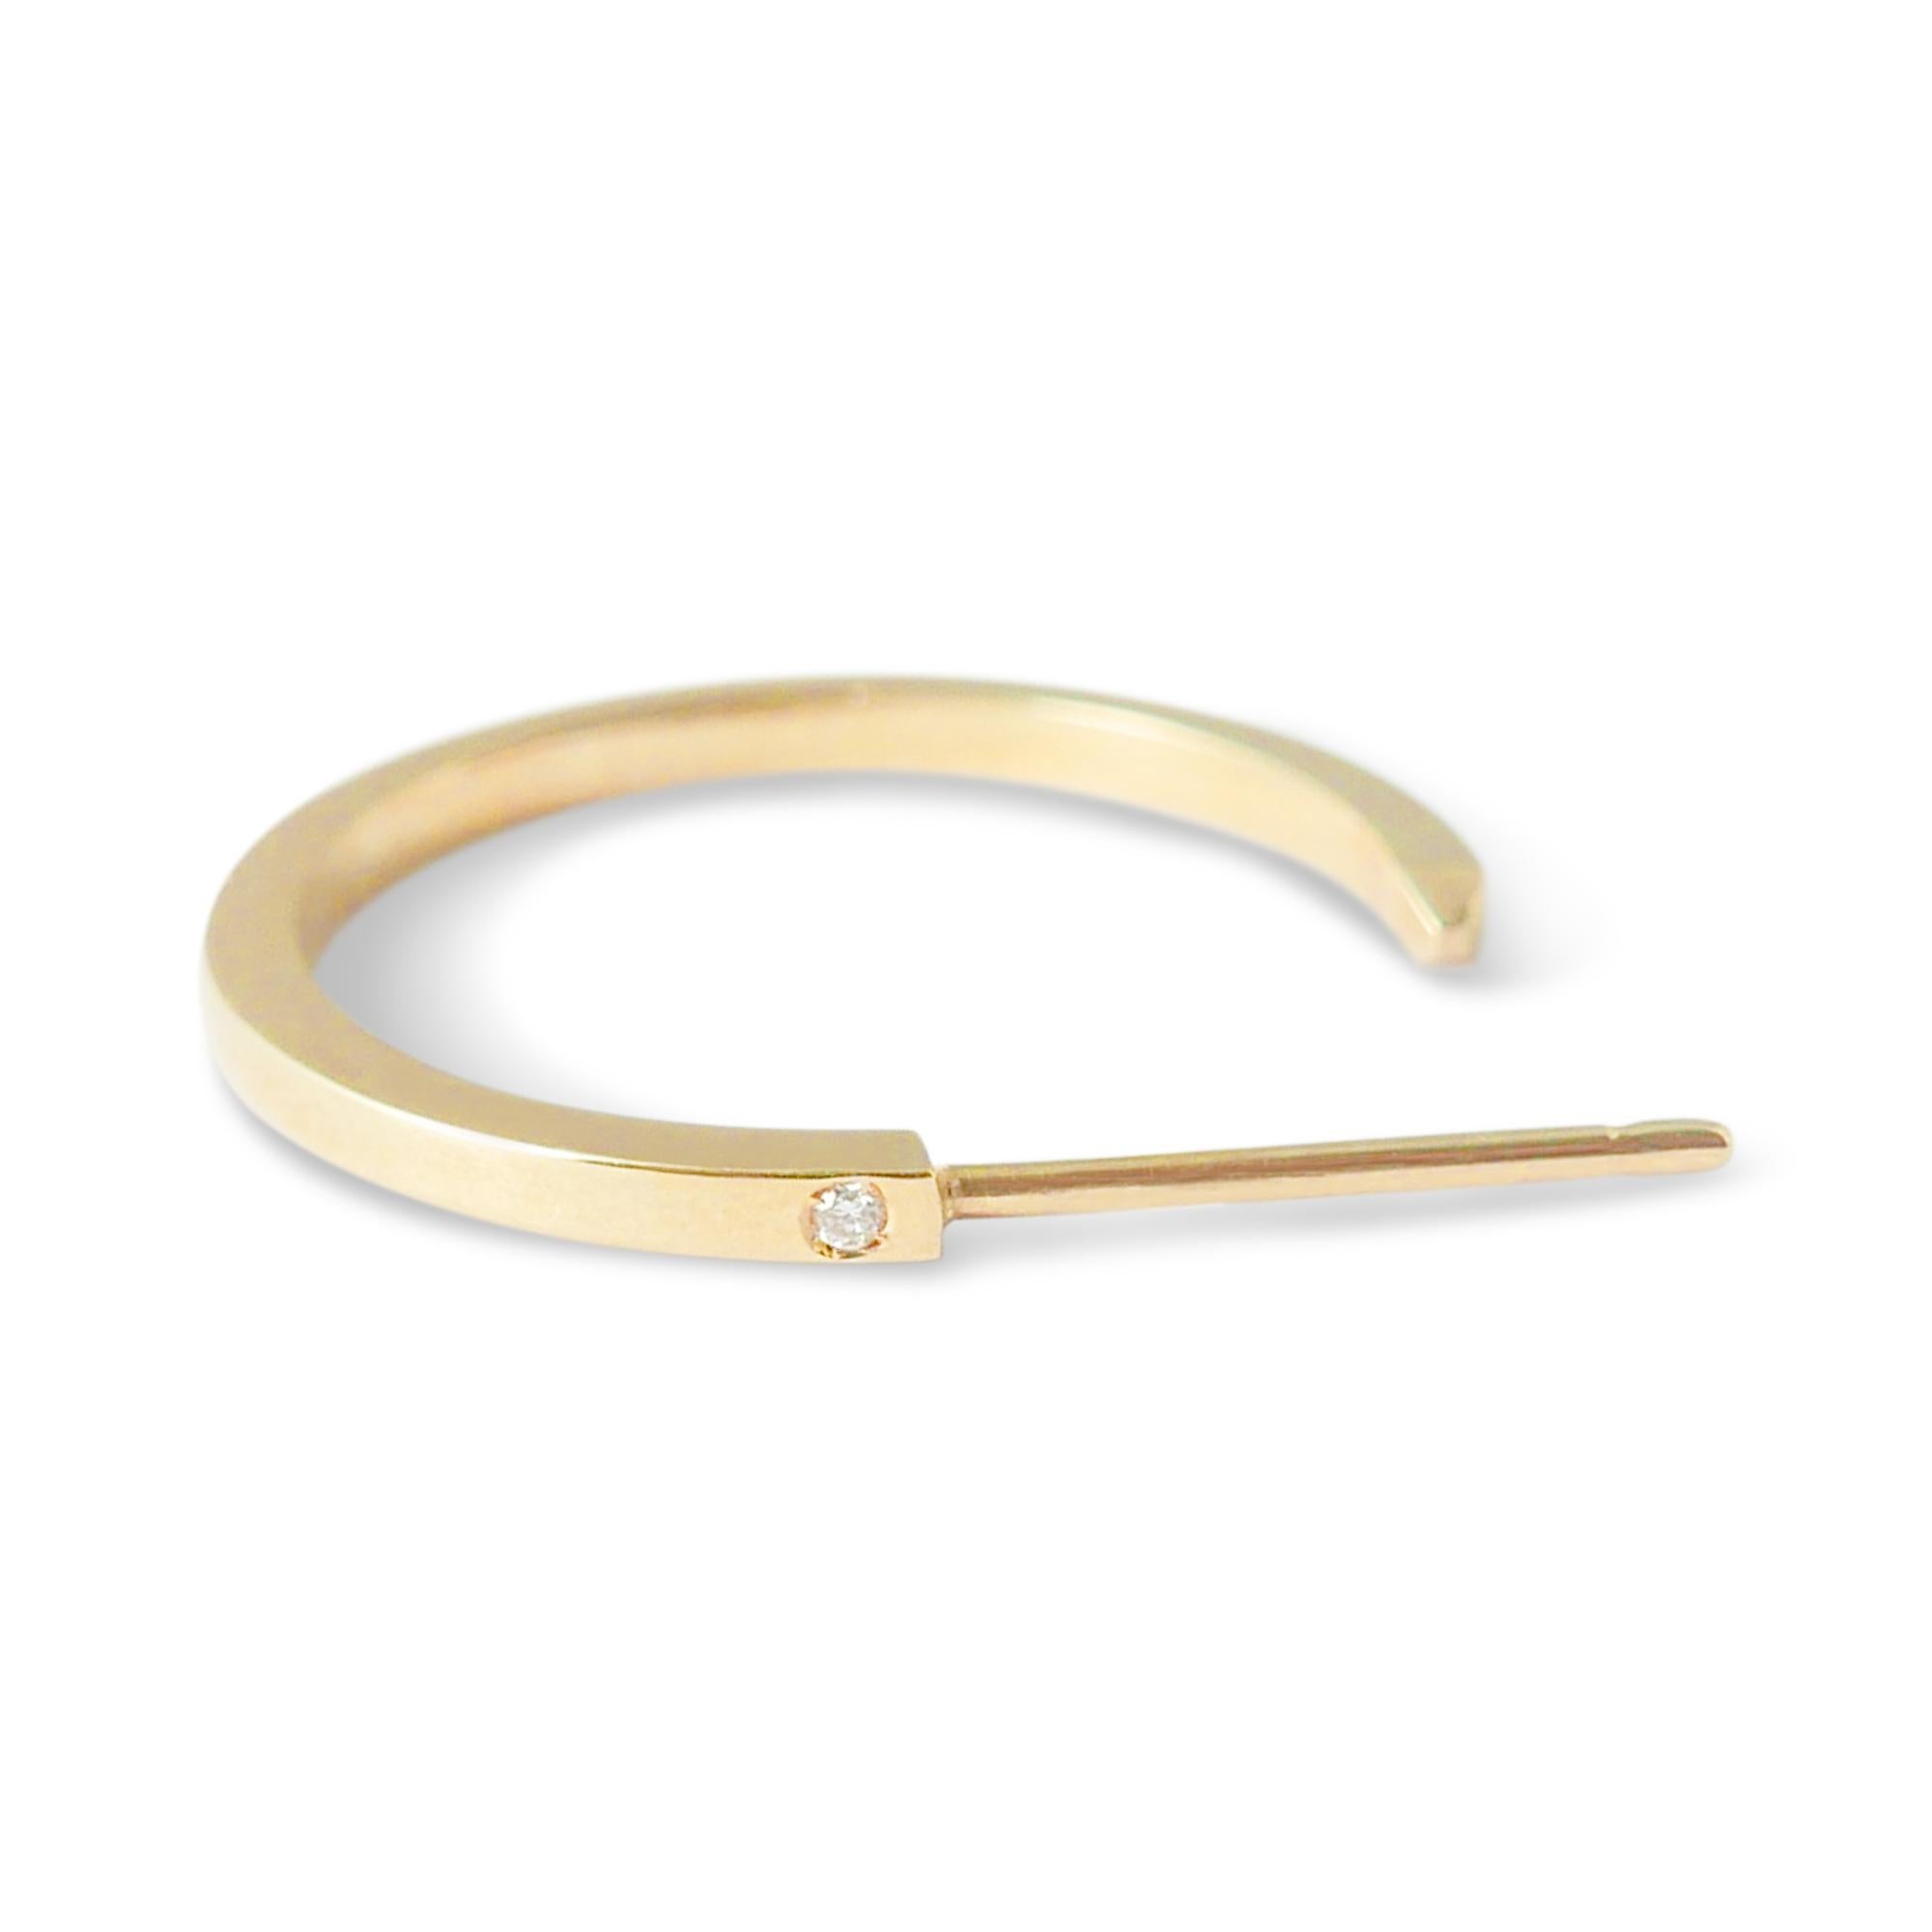 Clean-lined and minimalist, these solid 18-karat gold hoop earrings feature two tiny H-VS1 diamond accents on each hoop.  Measuring 1.9 cm in diameter, the hoops feature a classic post and butterfly fastening. 

Handmade in London.  Hallmarked 750